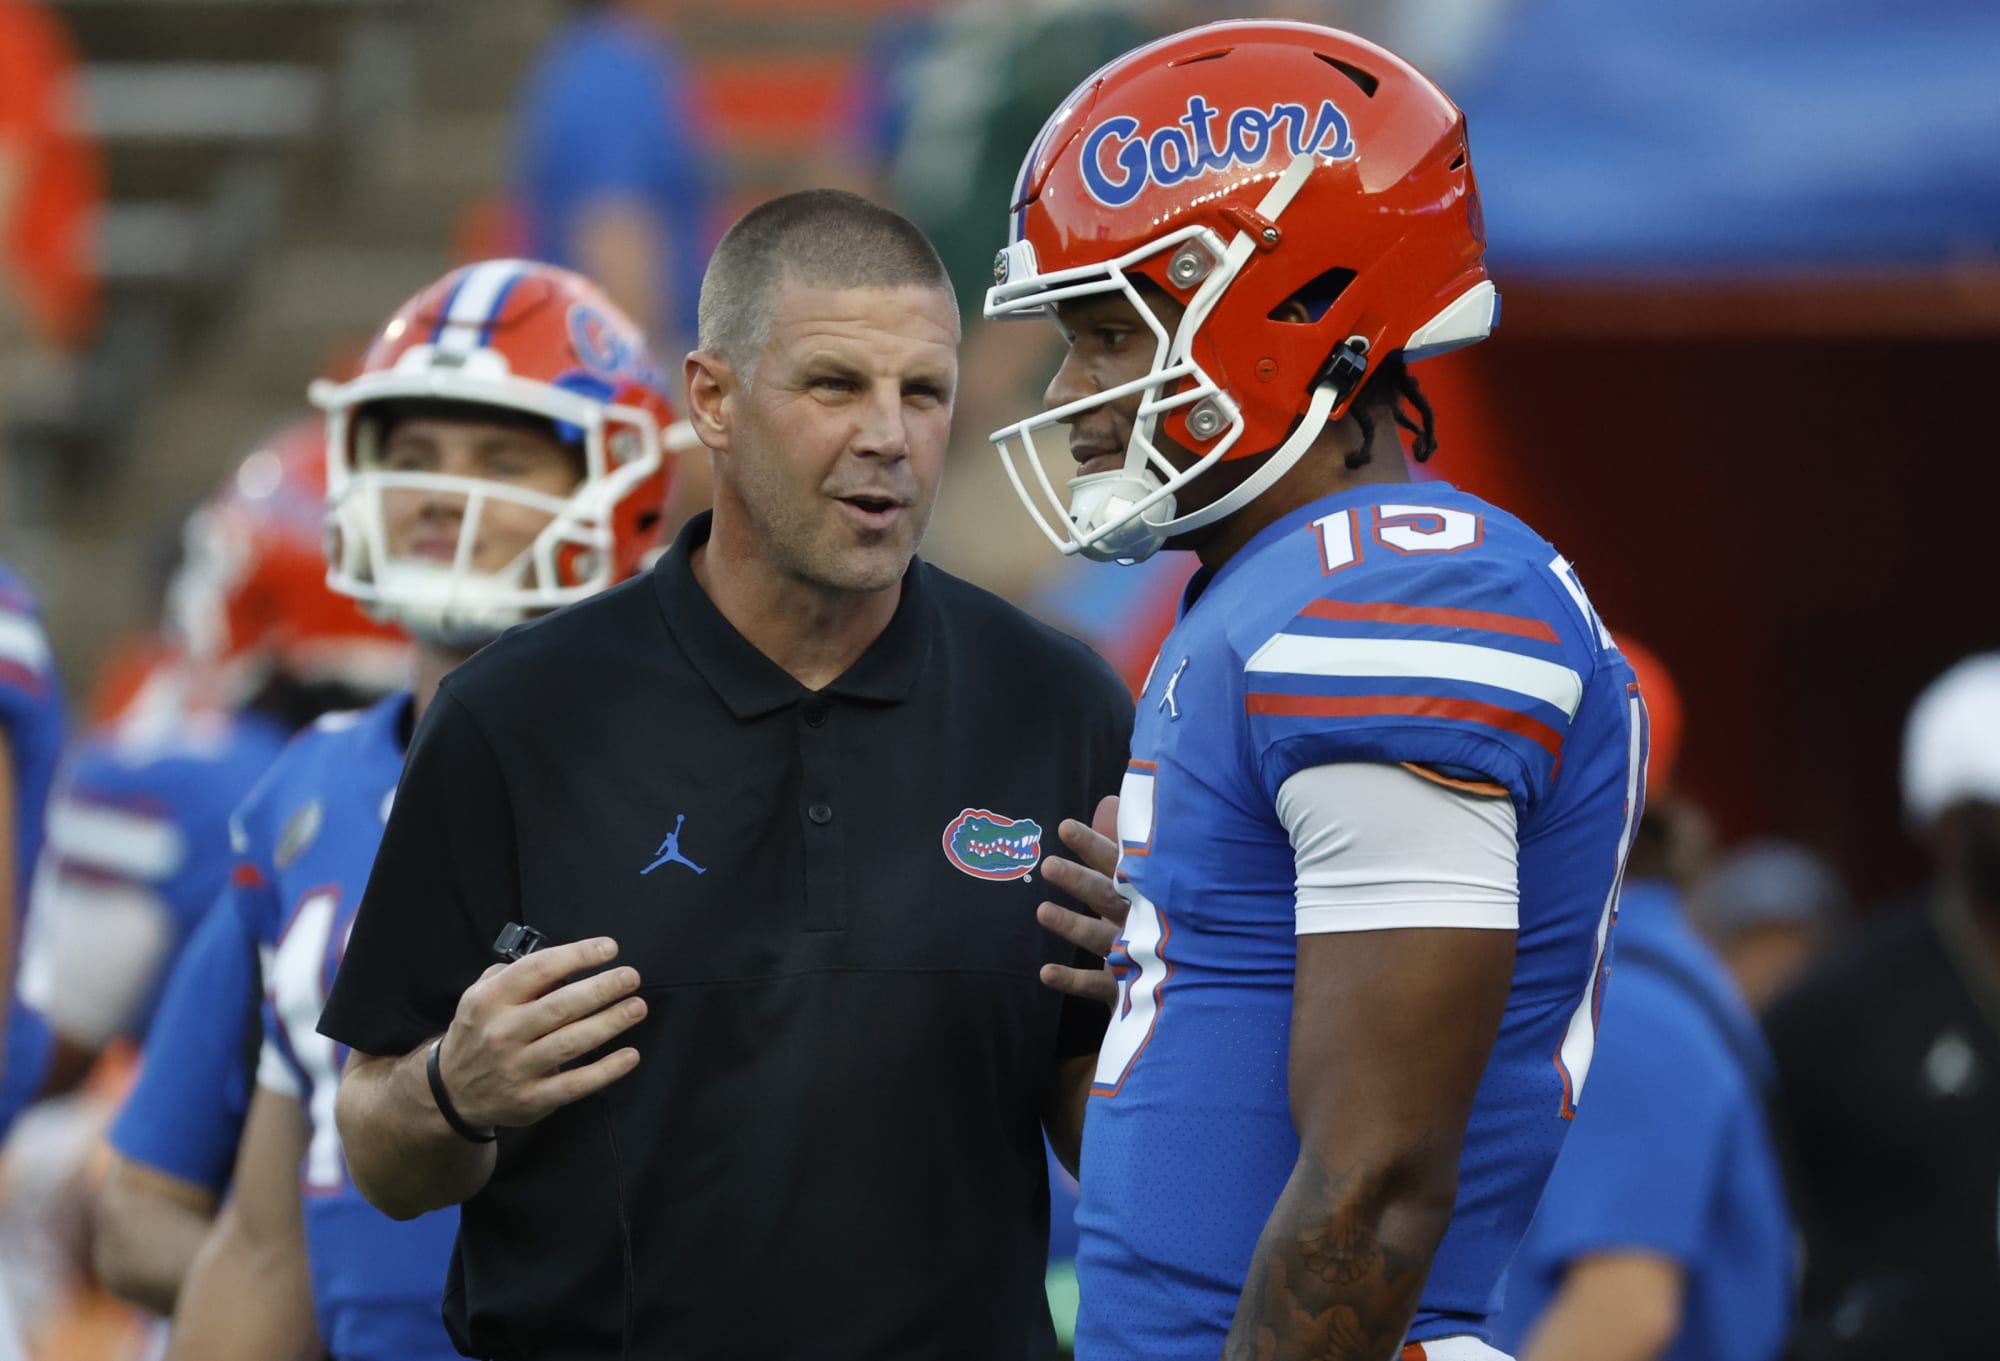 Tennessee football: Getting to know Florida from a Gators expert